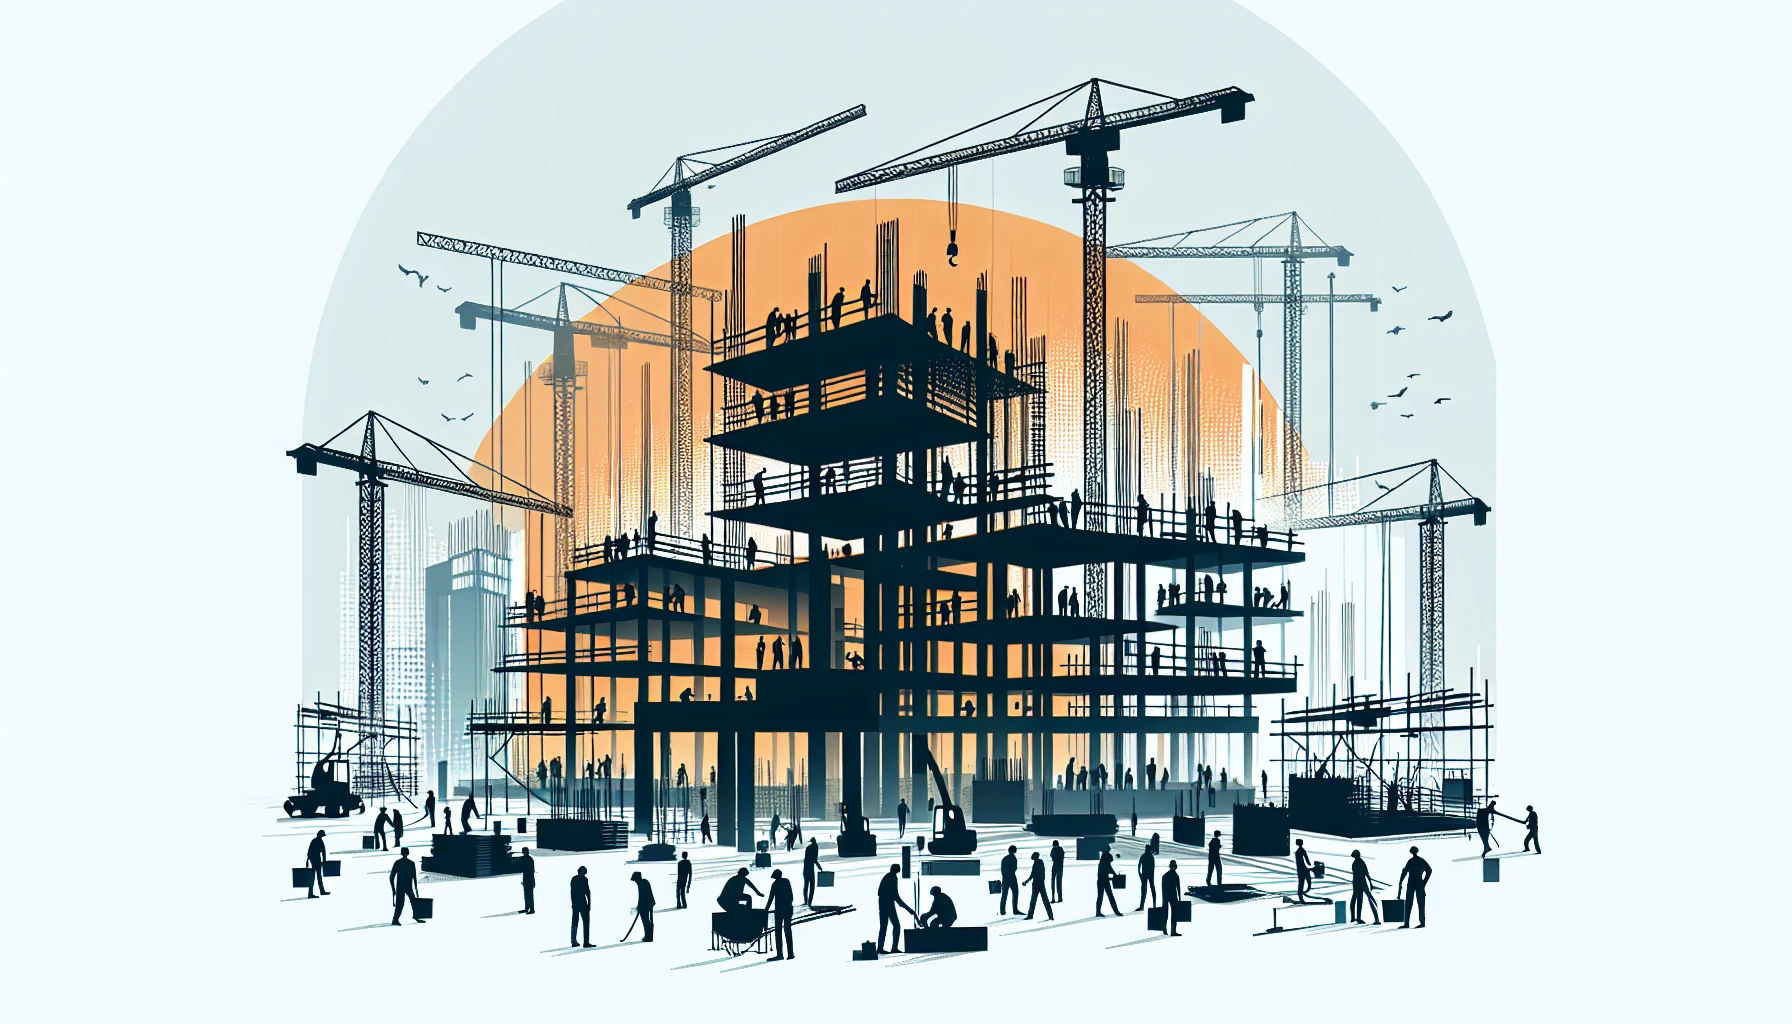 Building and construction management site with silhouetted figures and cranes